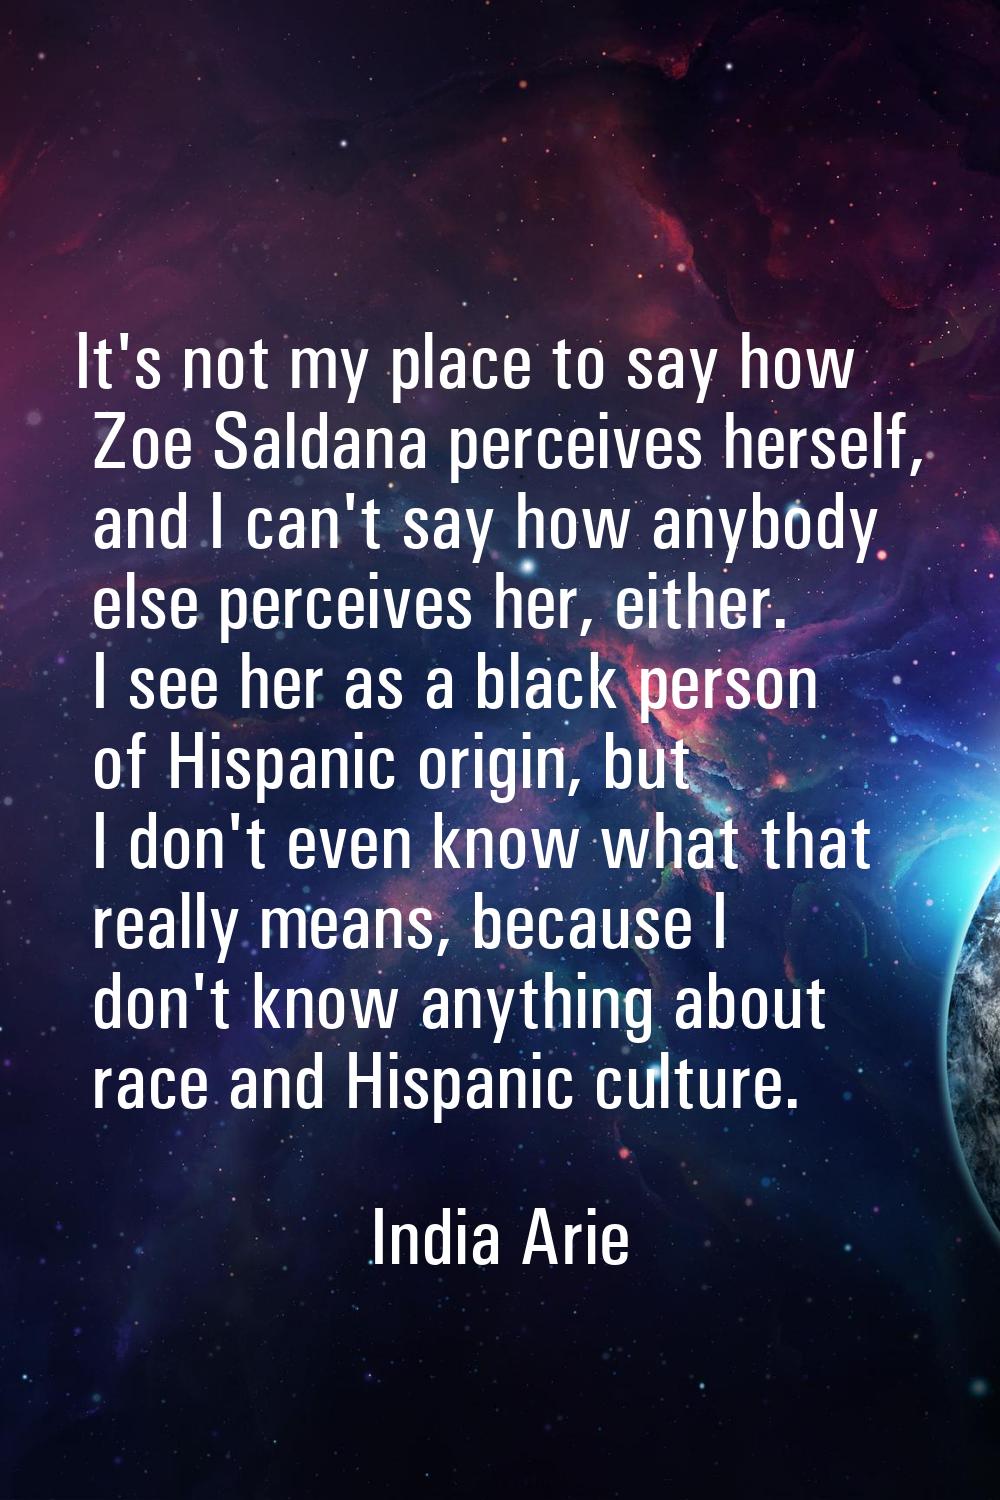 It's not my place to say how Zoe Saldana perceives herself, and I can't say how anybody else percei